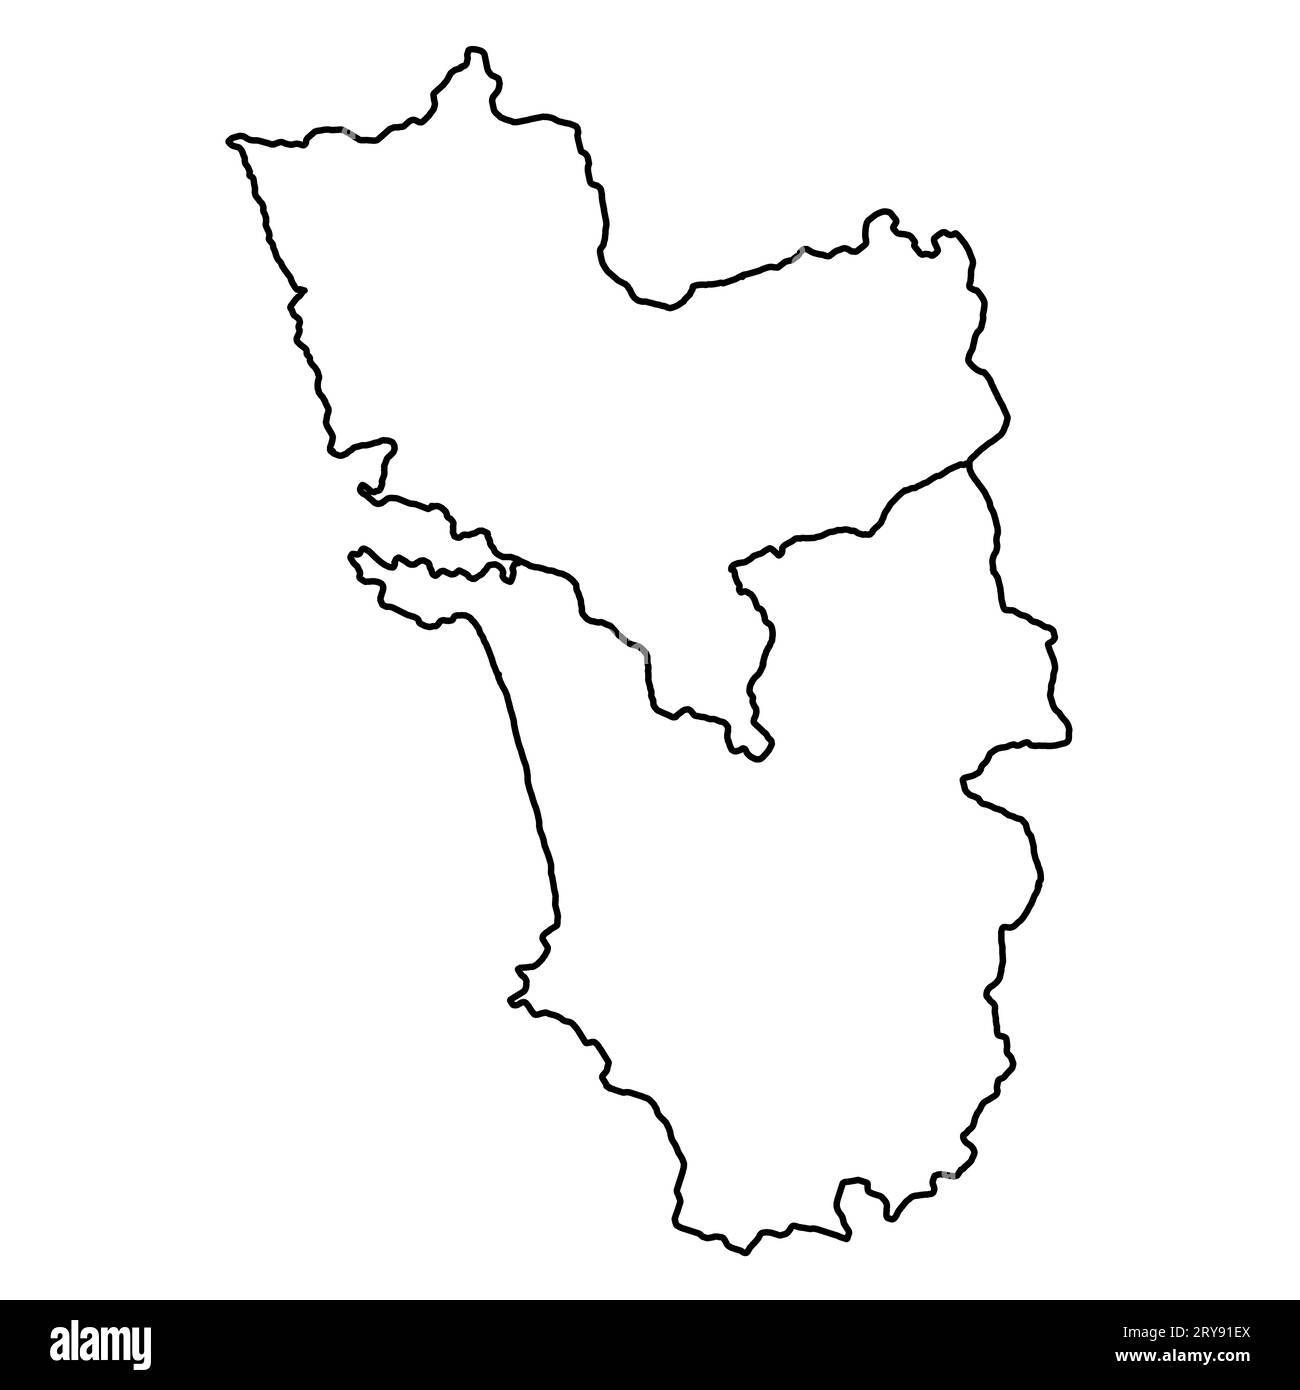 Goa, India Map Black Silhouette and Outline Isolated on white background. Stock Photo